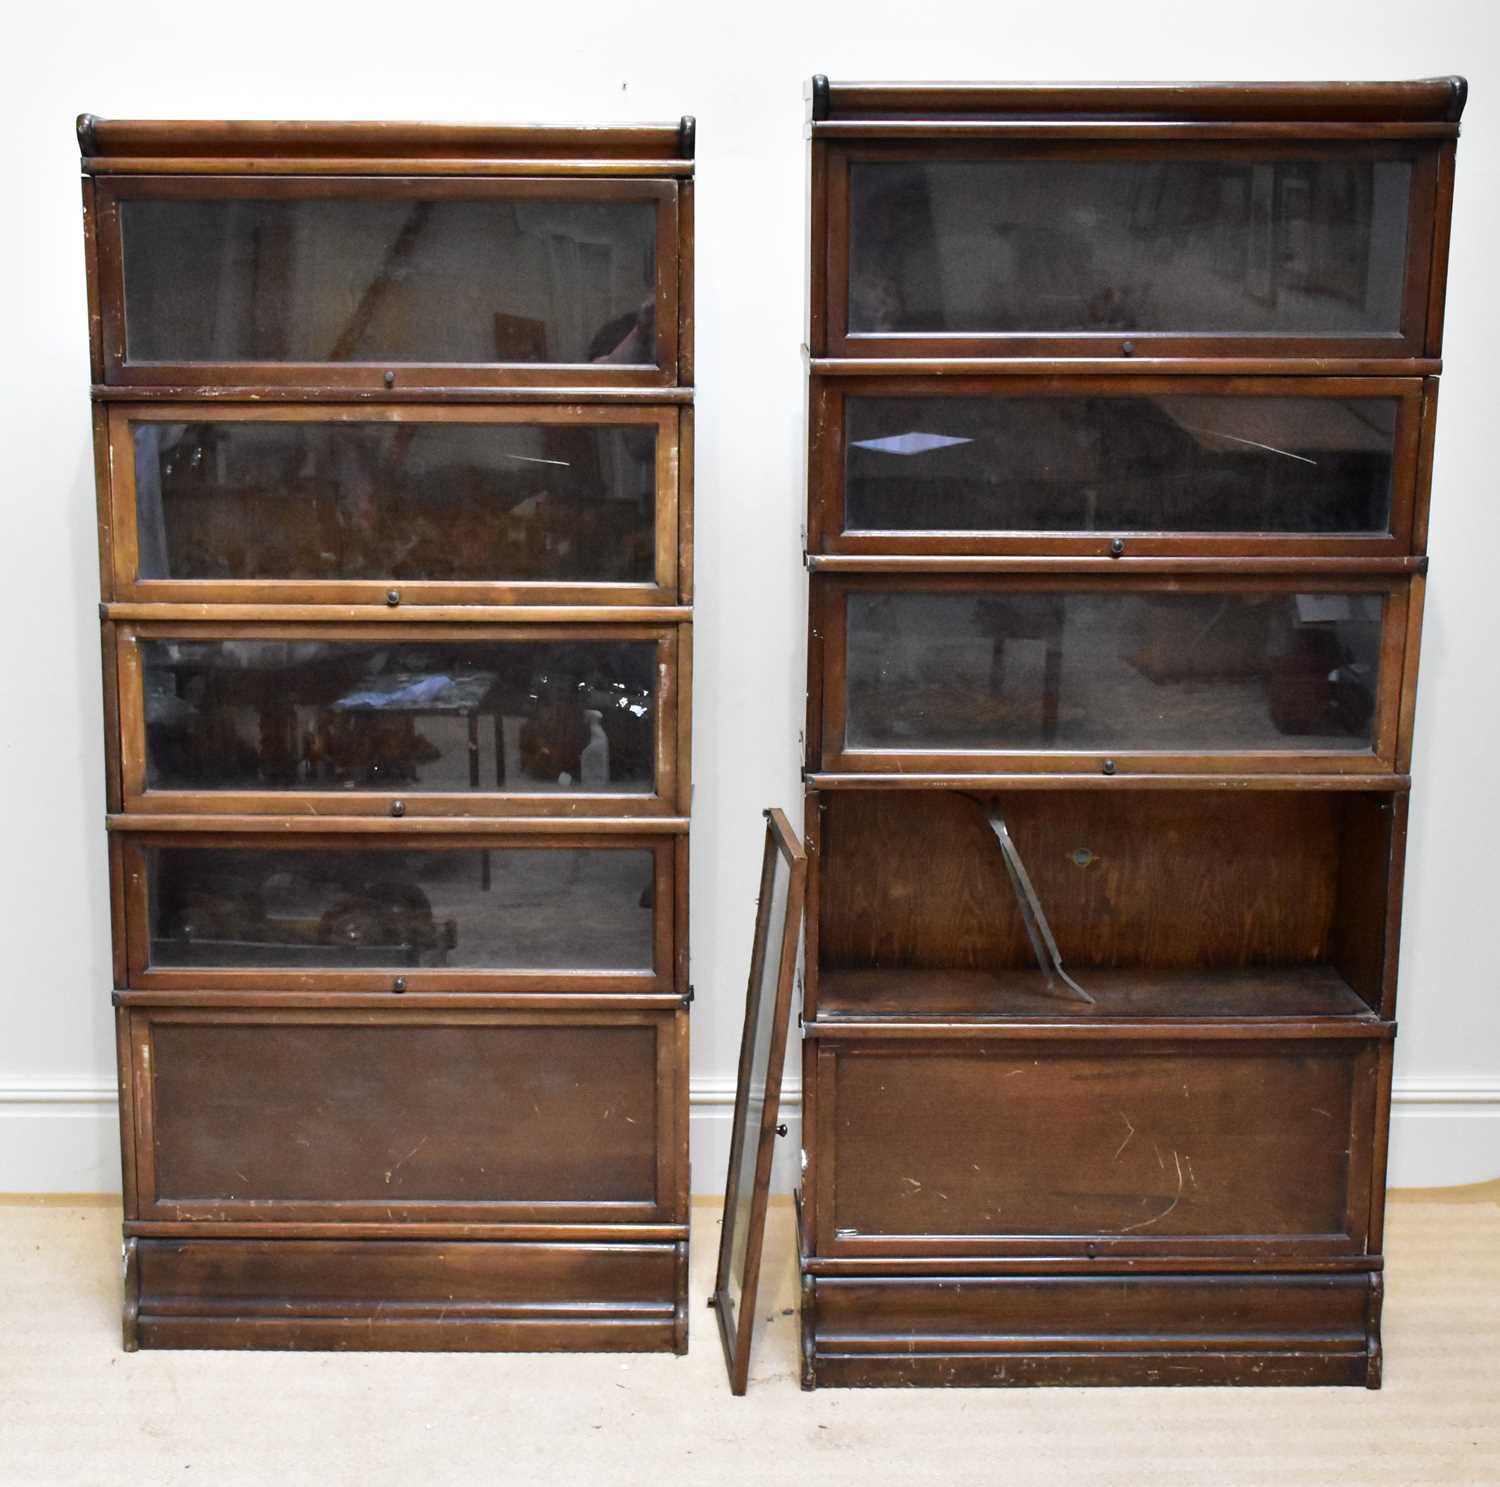 GLOBE WERNICKE; two metal bound five tier stacking bookcases with up and over doors, height of